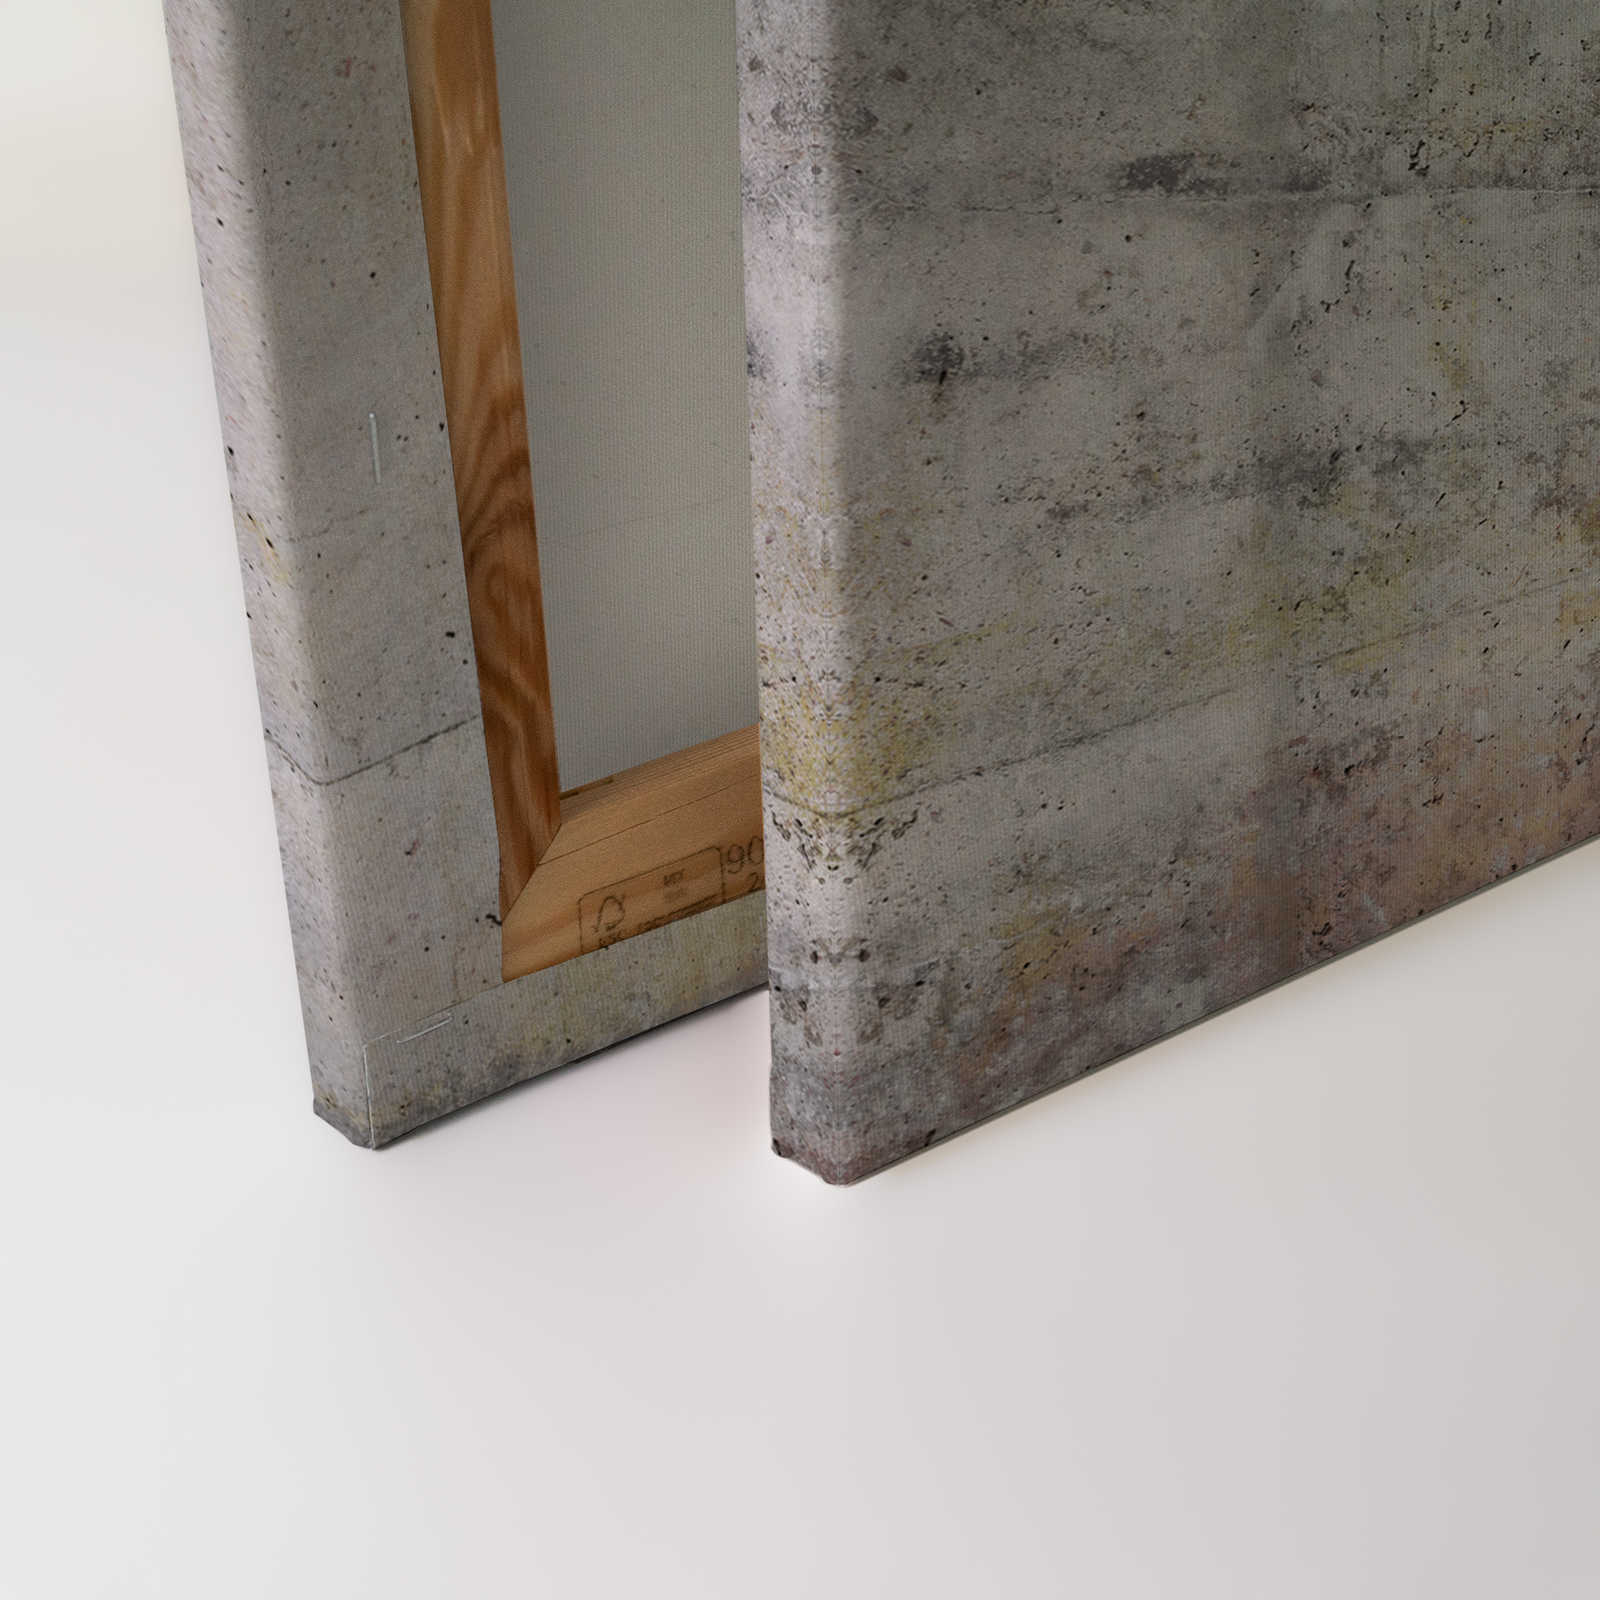             Canvas painting Concrete Wall Optics with Crack - 1.20 m x 0.80 m
        